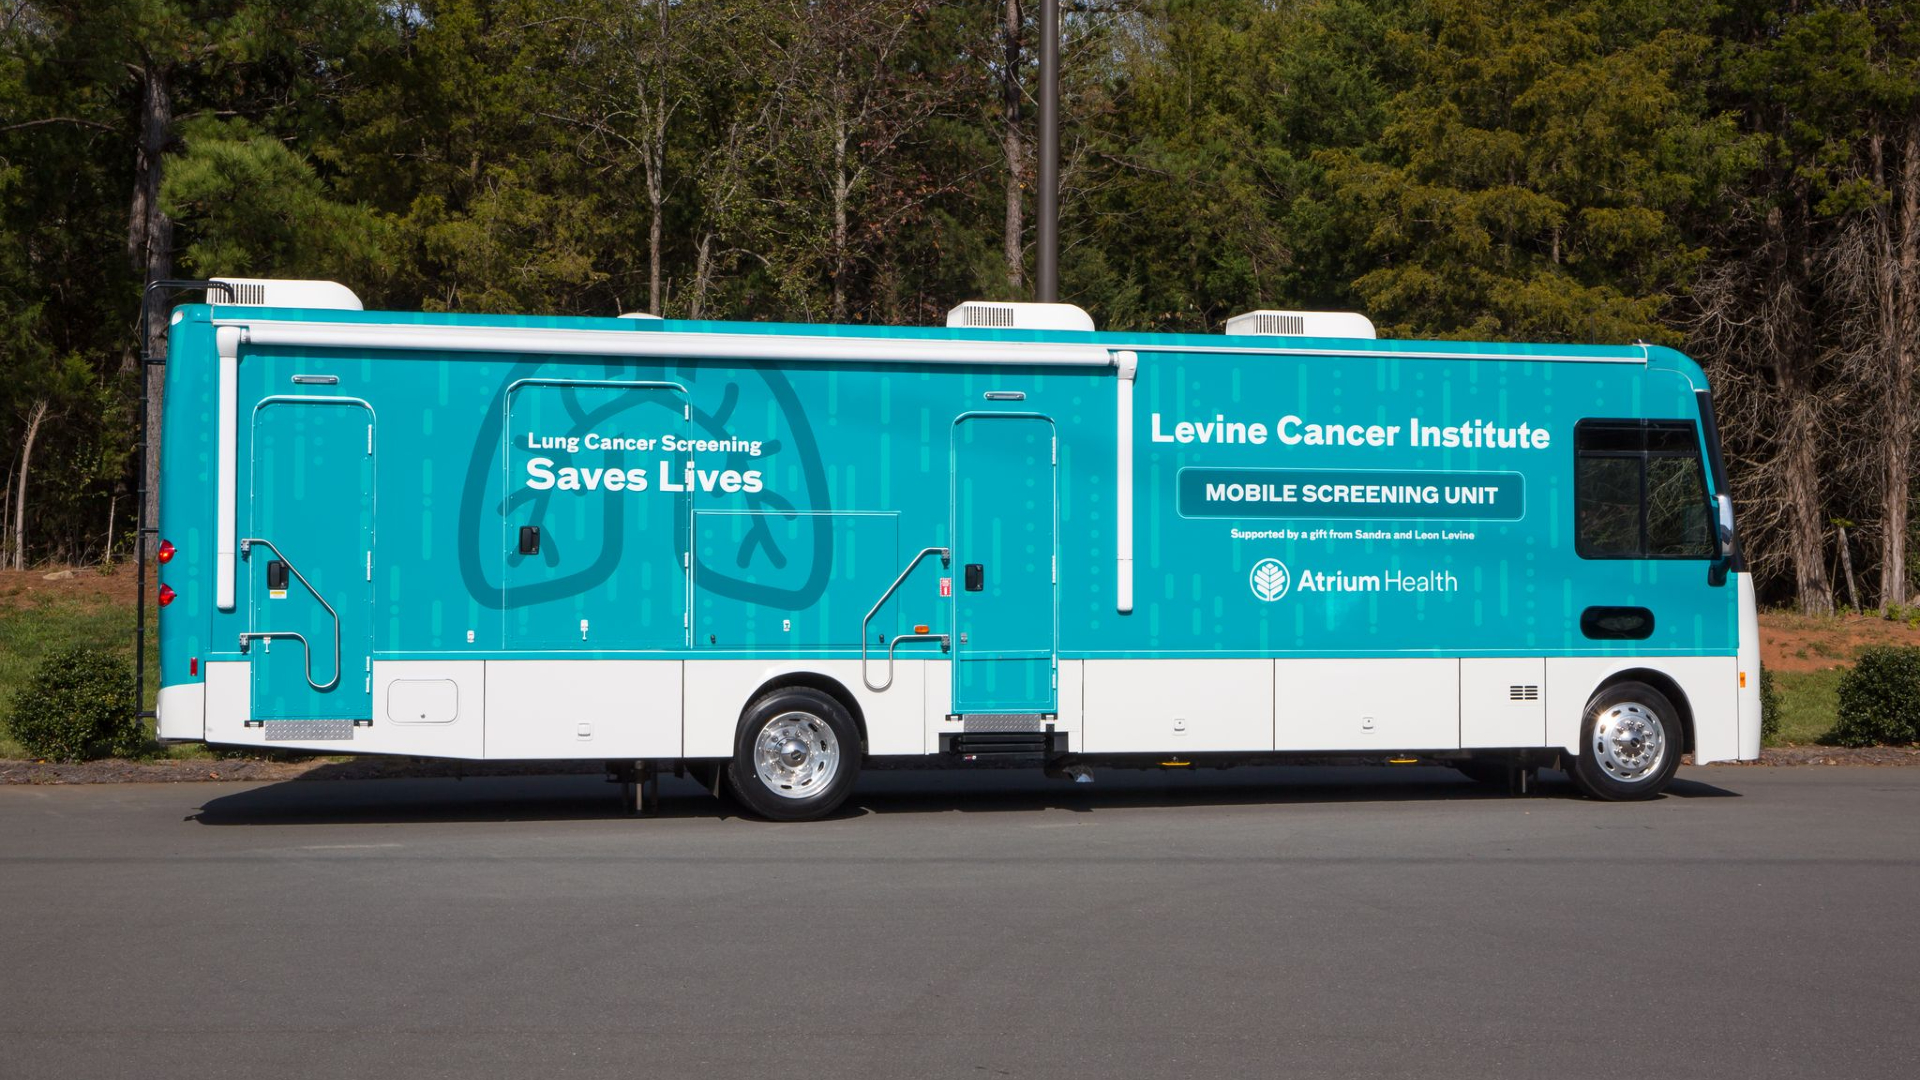 Levine Cancer Institute's mobile lung cancer screening unit is adding a second vehicle to its ranks, doubling its ability to reach underserved communities and vulnerable populations with free crucial screening resources. 